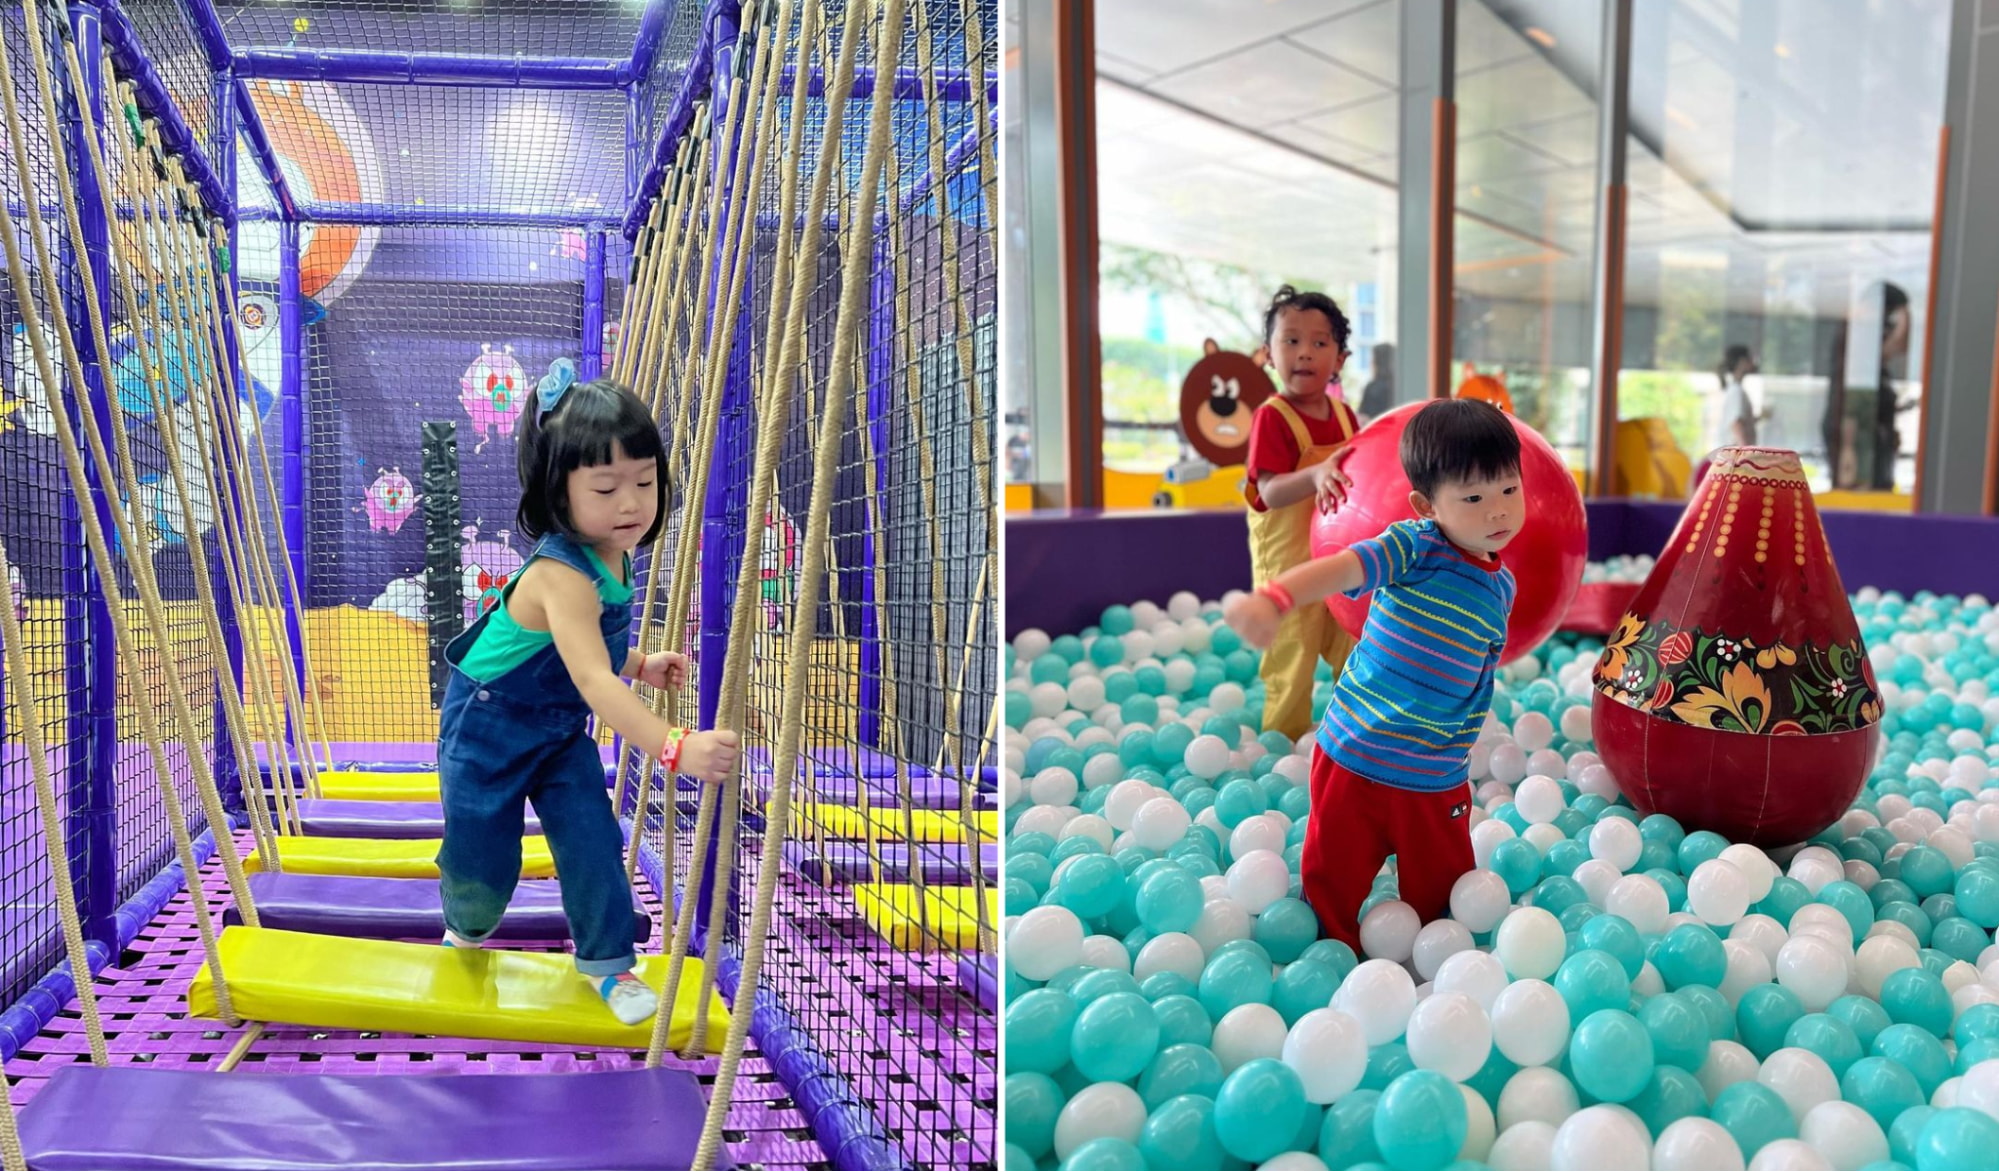 a balancing activity zone and a ball pit for kids at kidztopia singapore